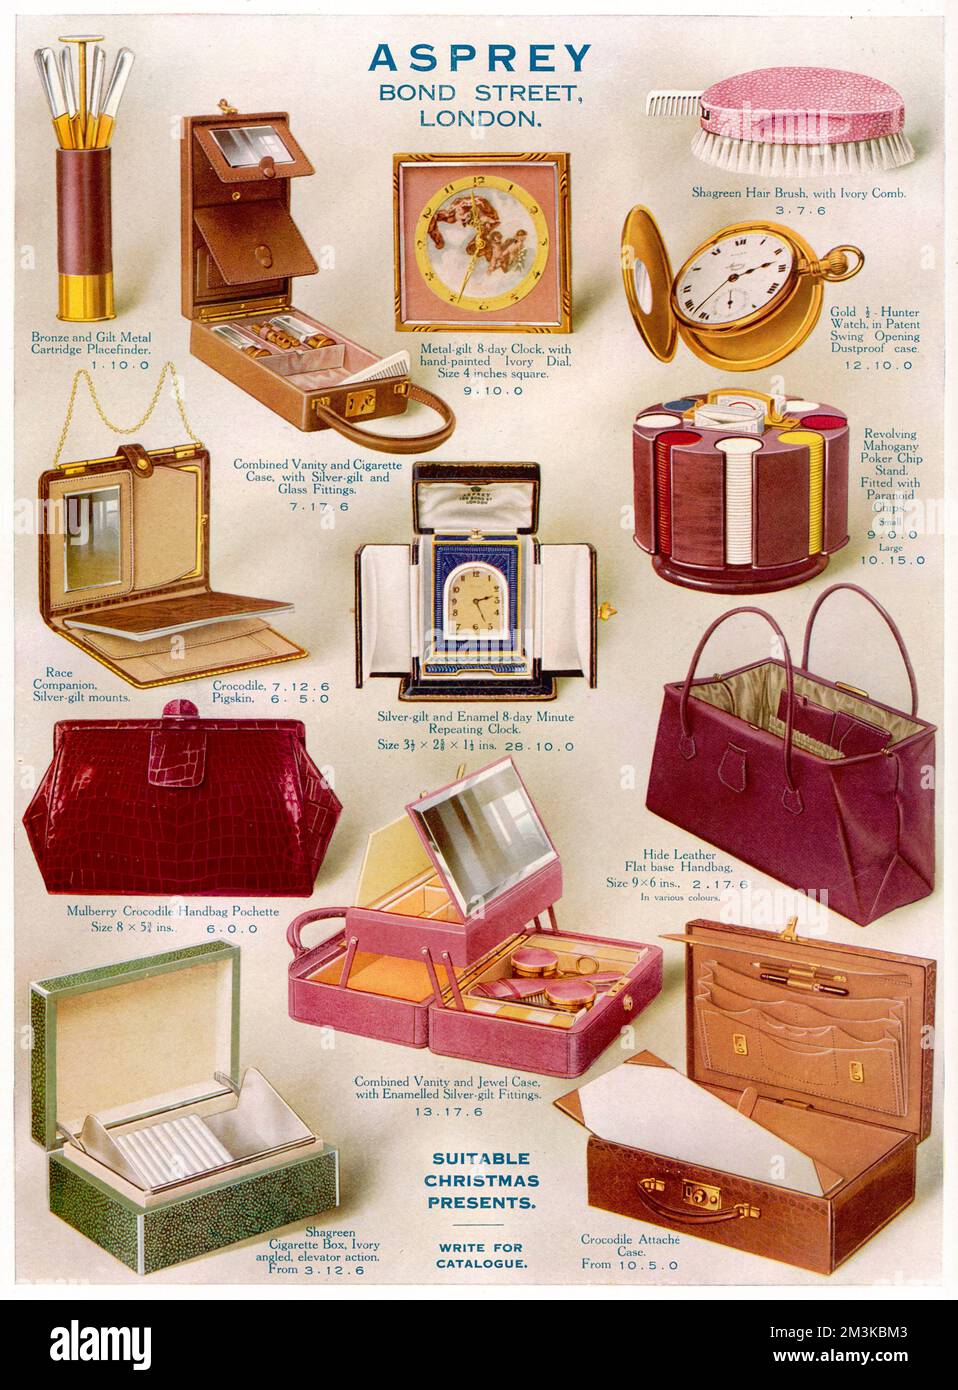 Colour advertisement for Asprey of Bond Street displaying a wide variety of Christmas present ideas, including an attache case, a shagreen cigarette box, leather handbag, crocodile handbag pochette, a poker chip stand, race companion, pocket watch, clock, combined vanity and cigarette case and a shagreen hair brush with ivory comb.  1926 Stock Photo